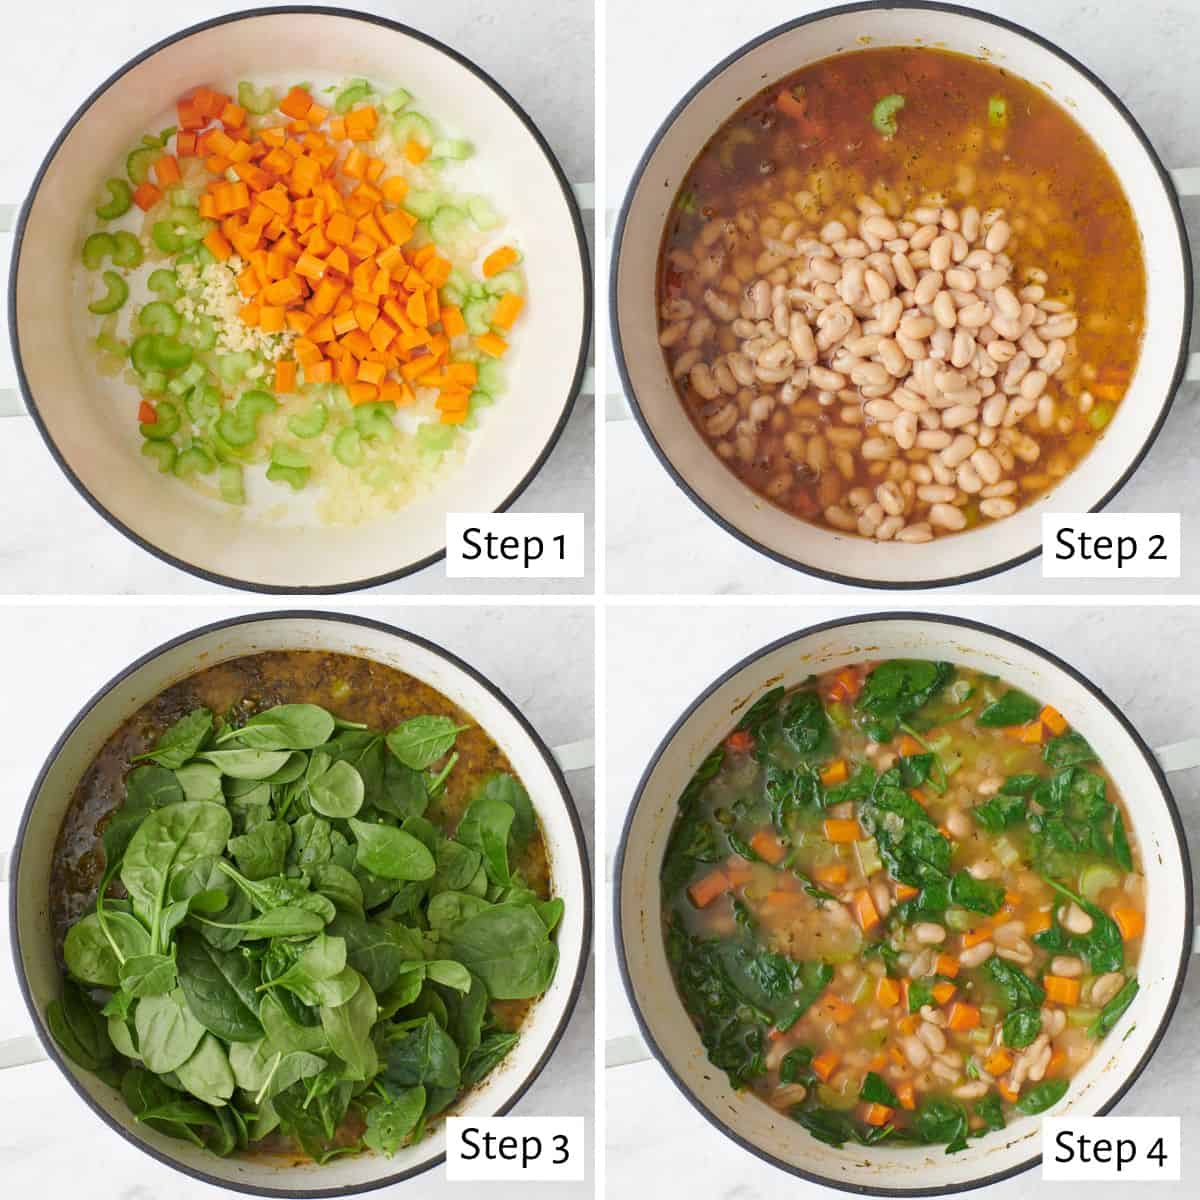 Collage showing steps to make white bean soup - saute onions, then add carrots and celery